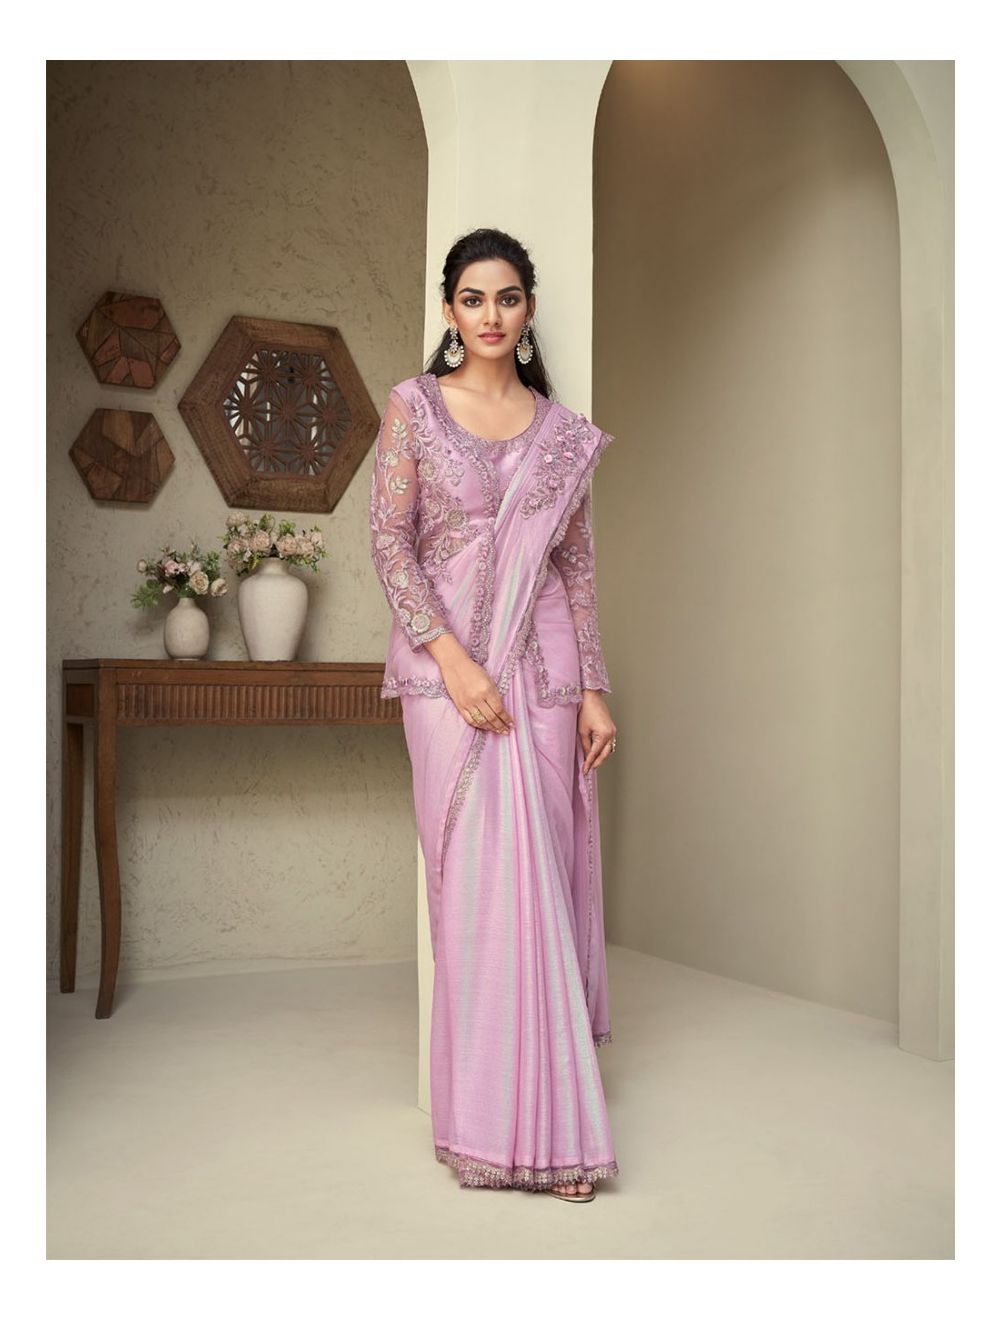 Shop the Hottest Modern Saree with Long Jacket Online Now